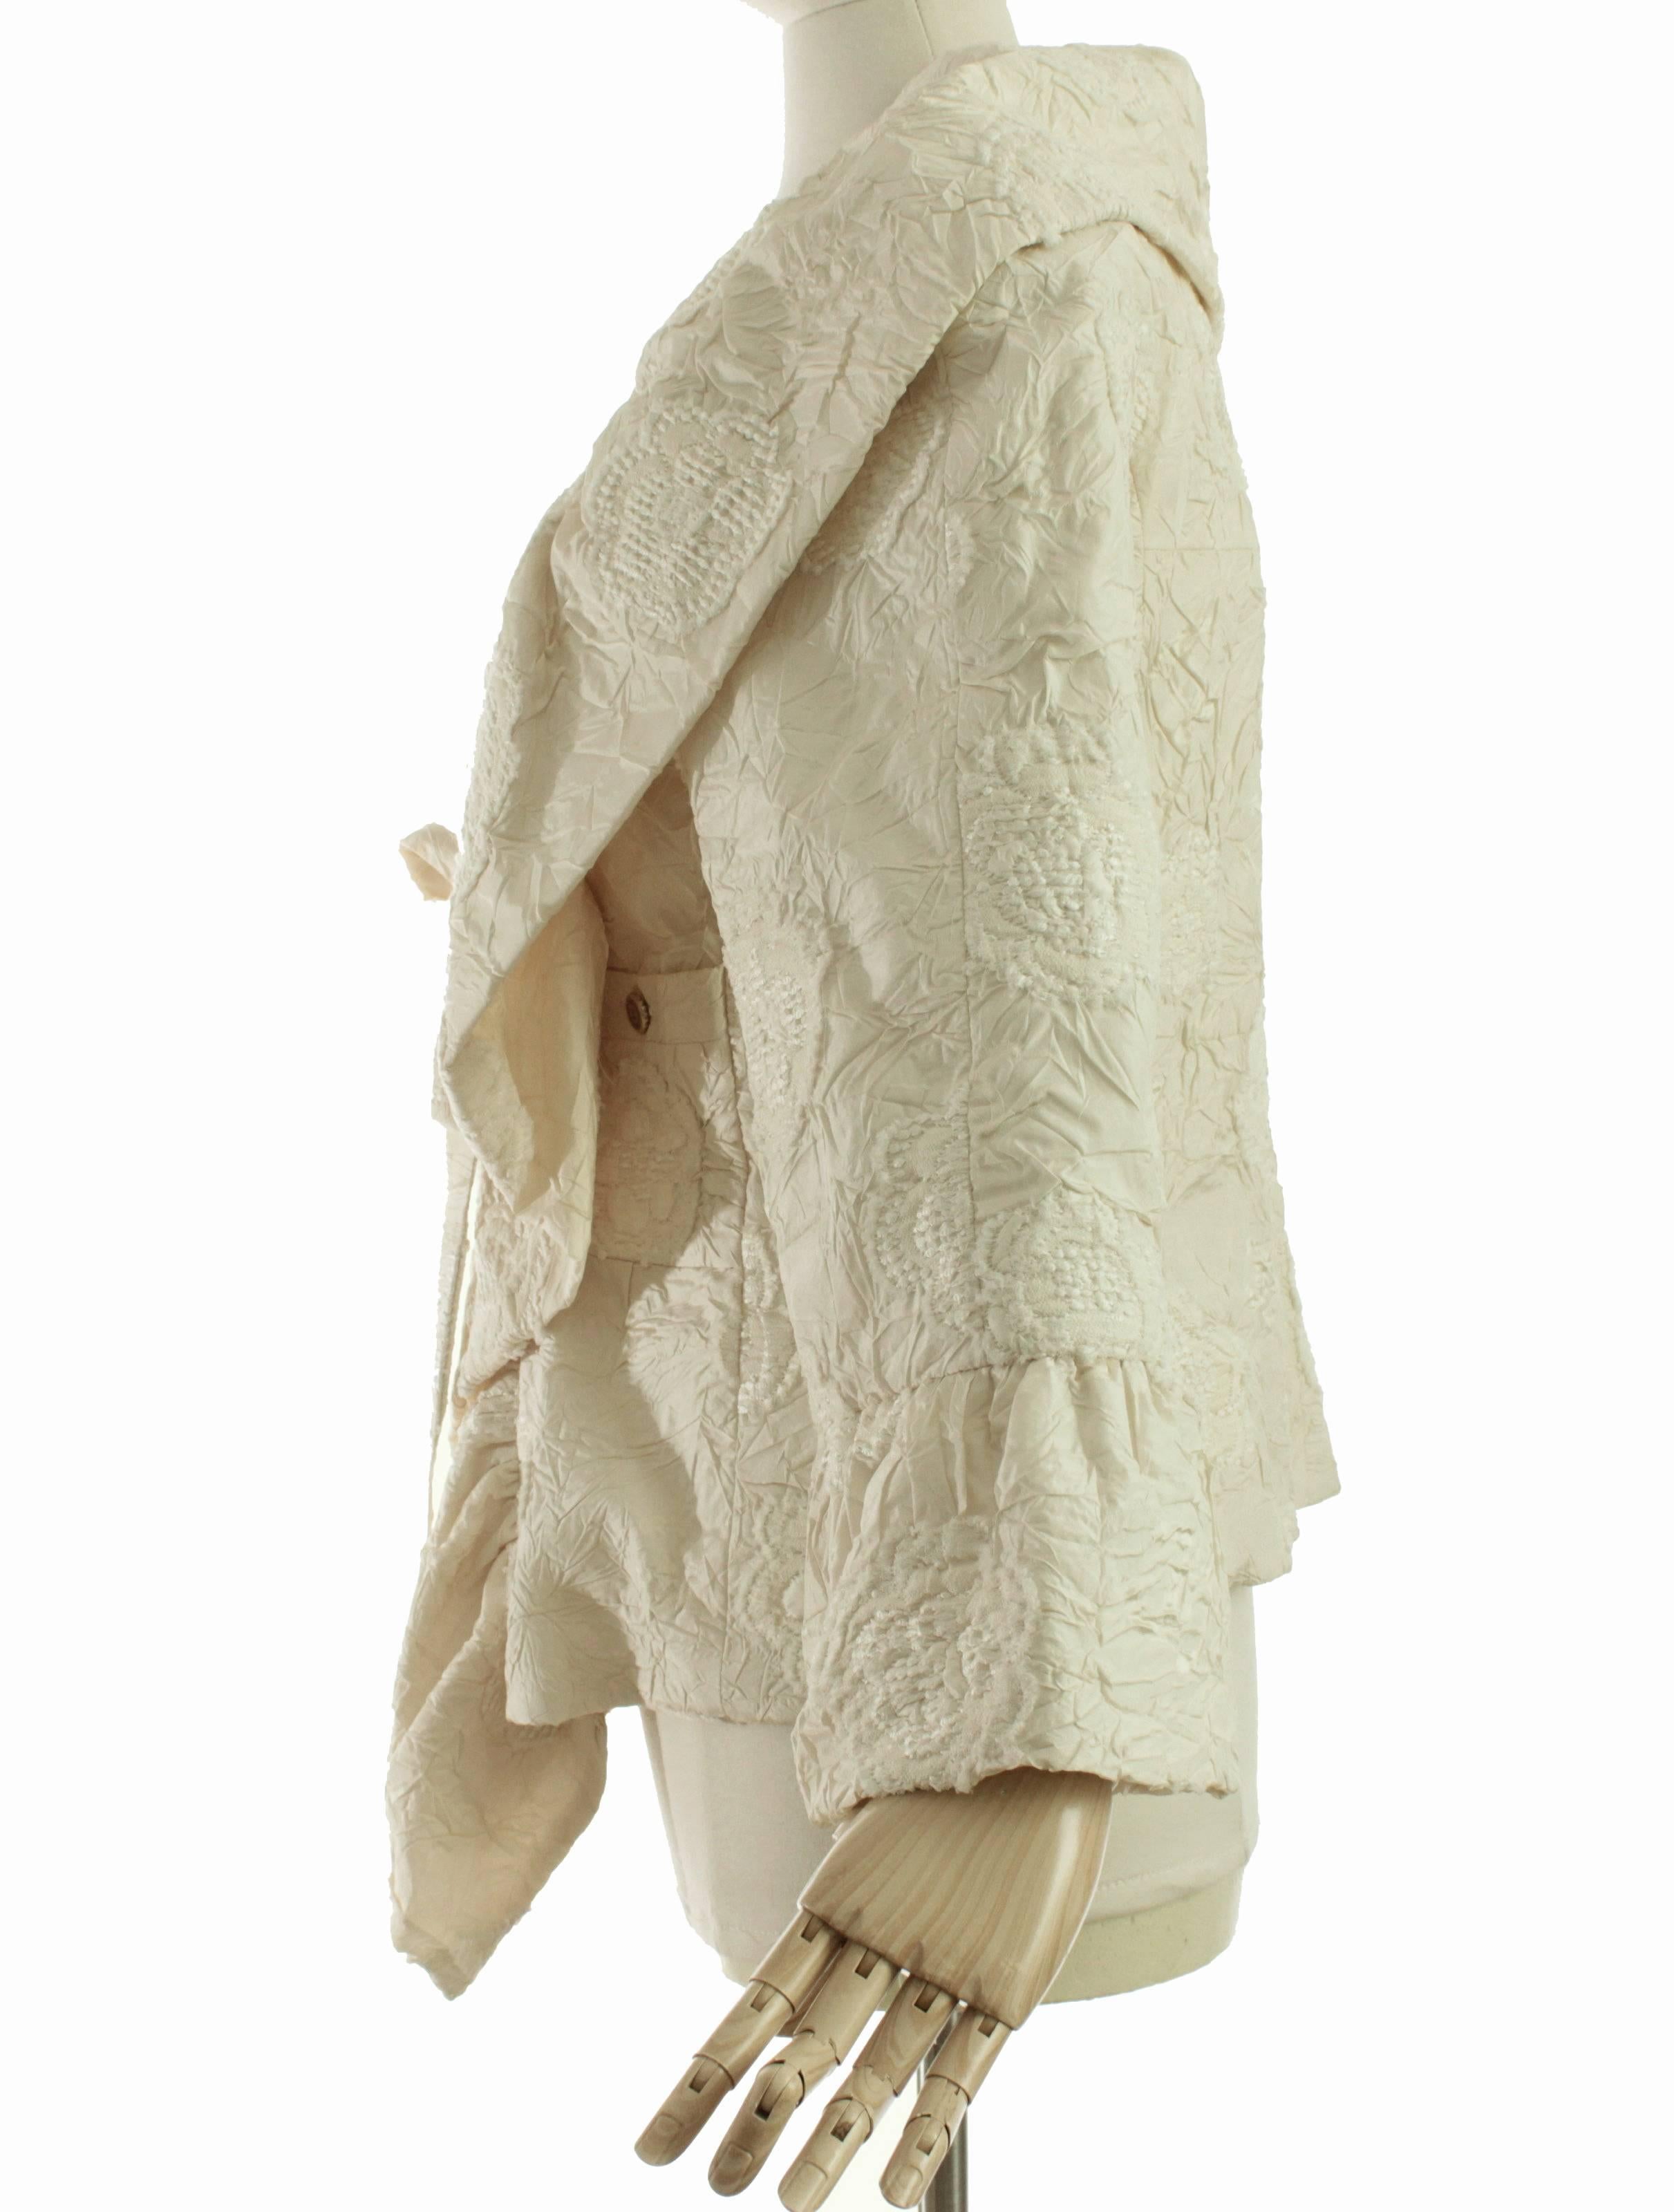 Women's Chanel Camellia Jacket with Bell Ruffle Sleeves Cream Ivory Silk Jacquard 06P 46